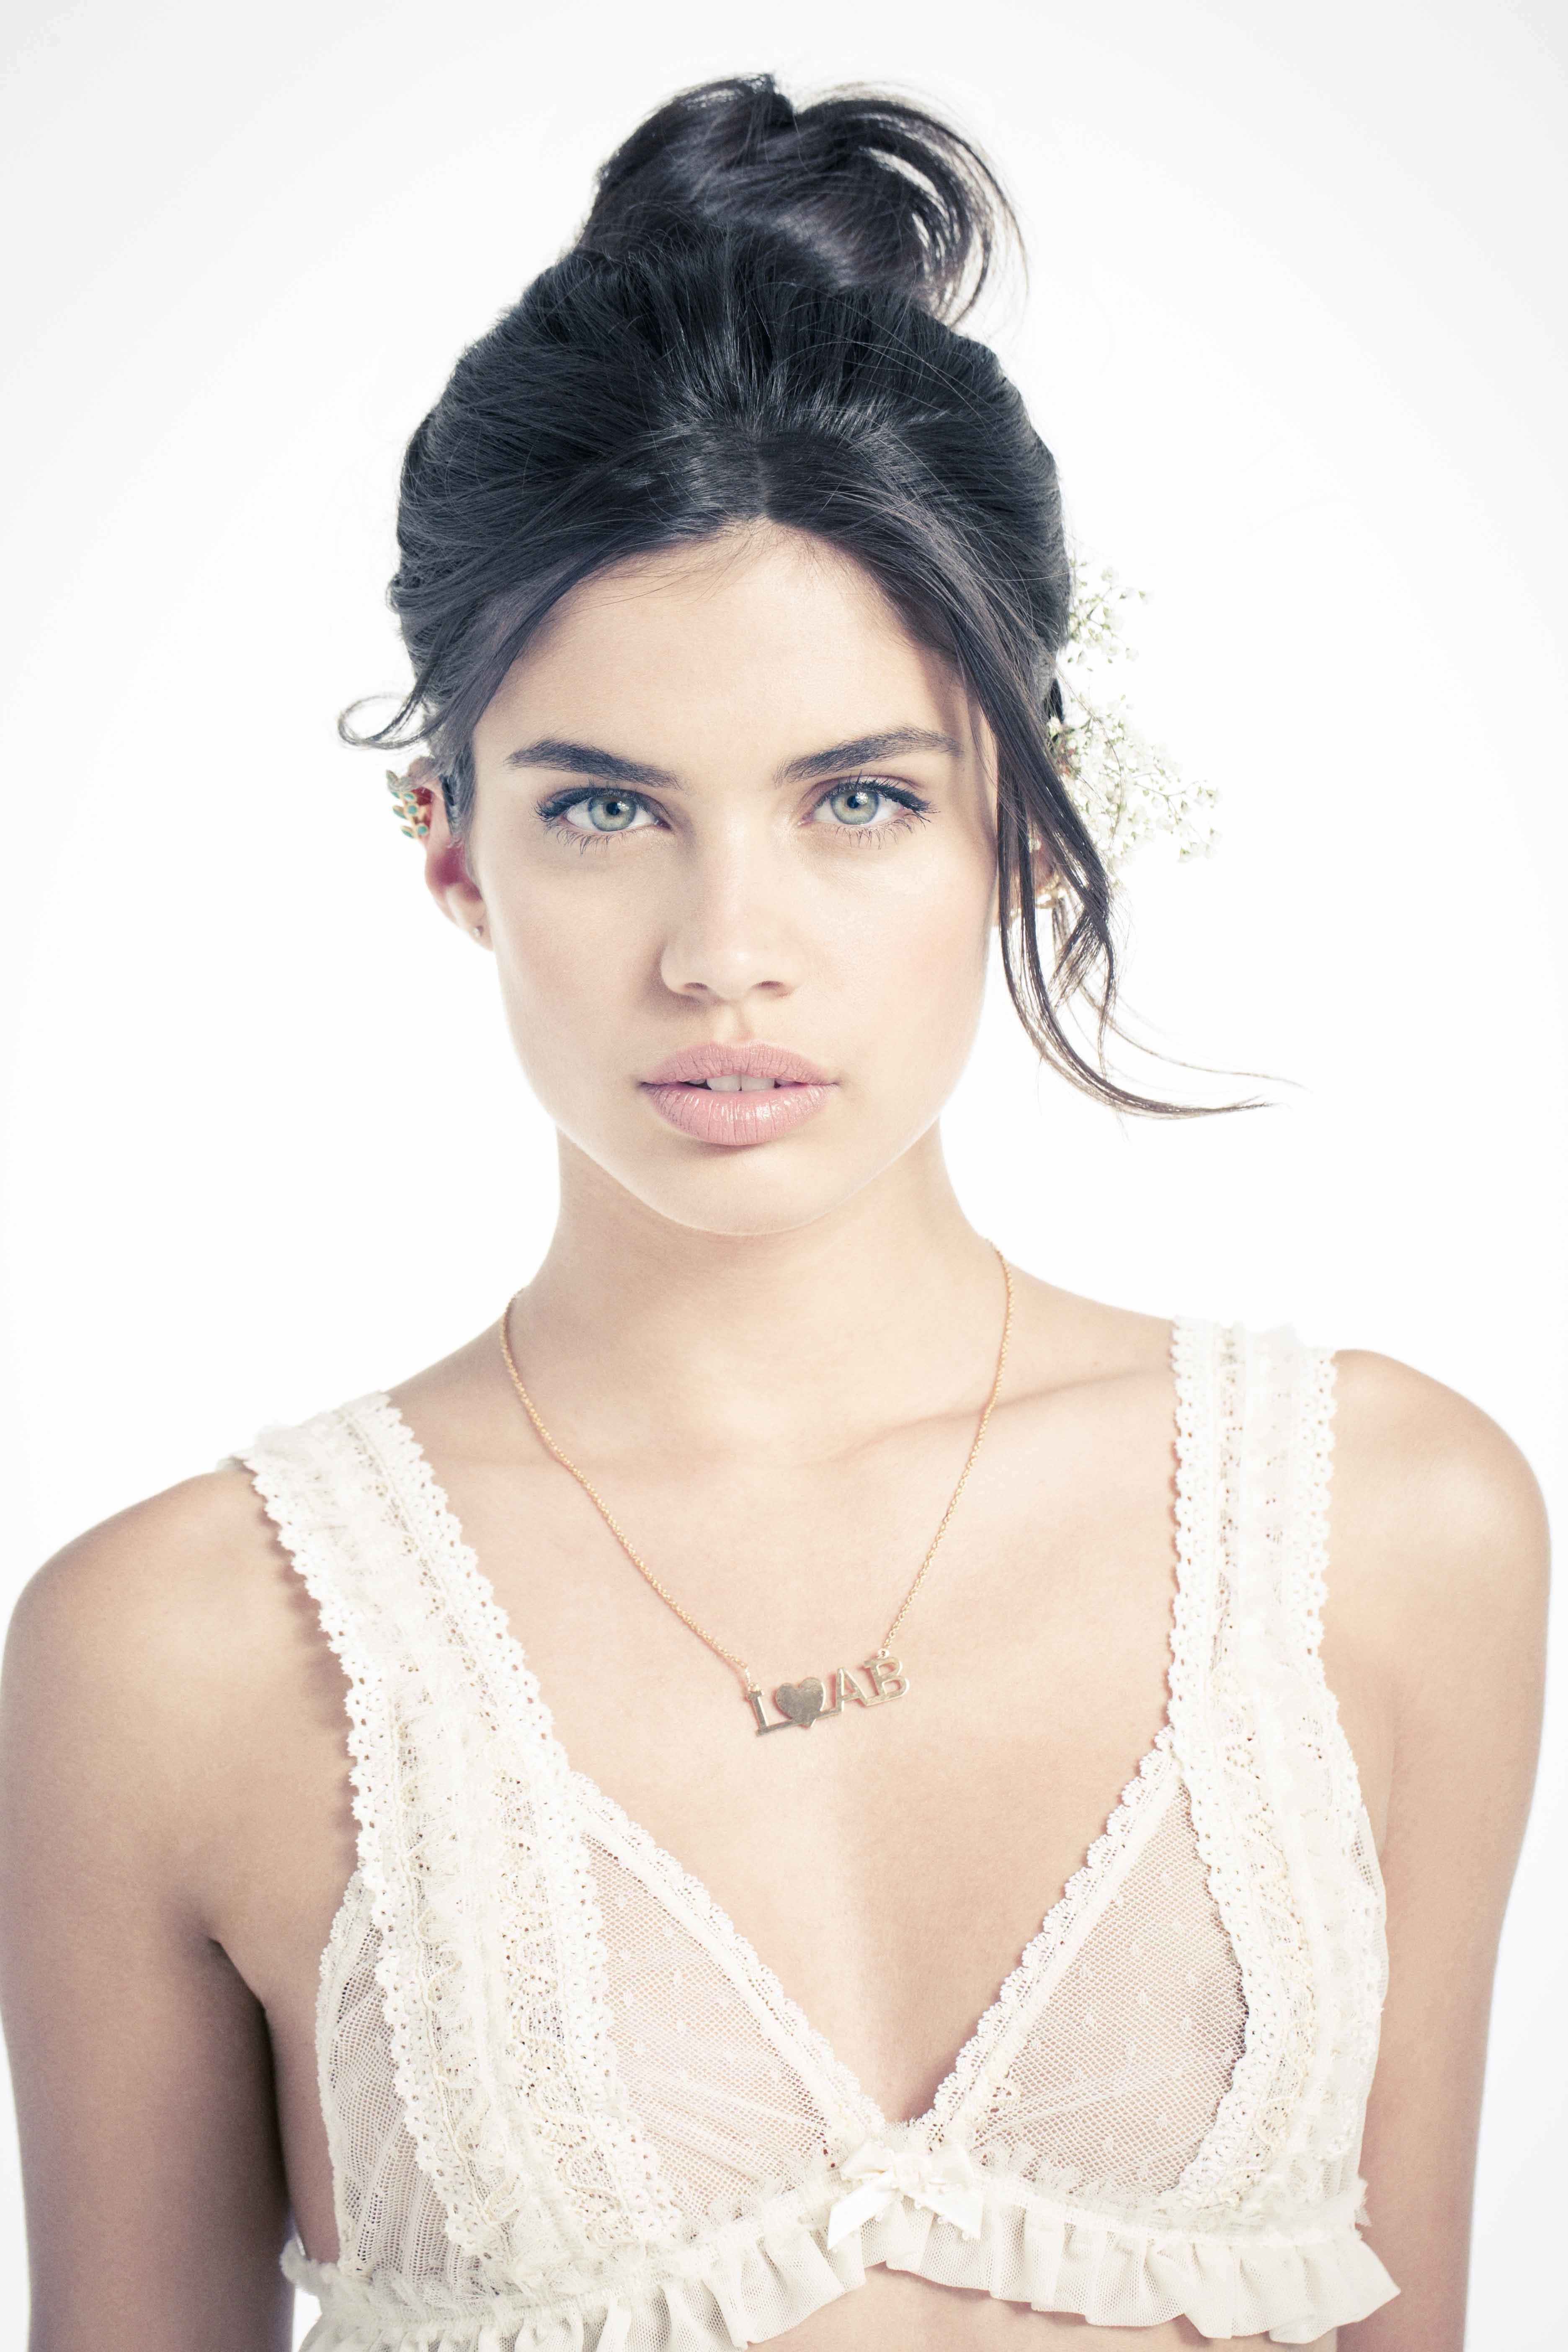 Sara Sampaio Wallpapers Images Photos Pictures Backgrounds - Sara Sampaio , HD Wallpaper & Backgrounds